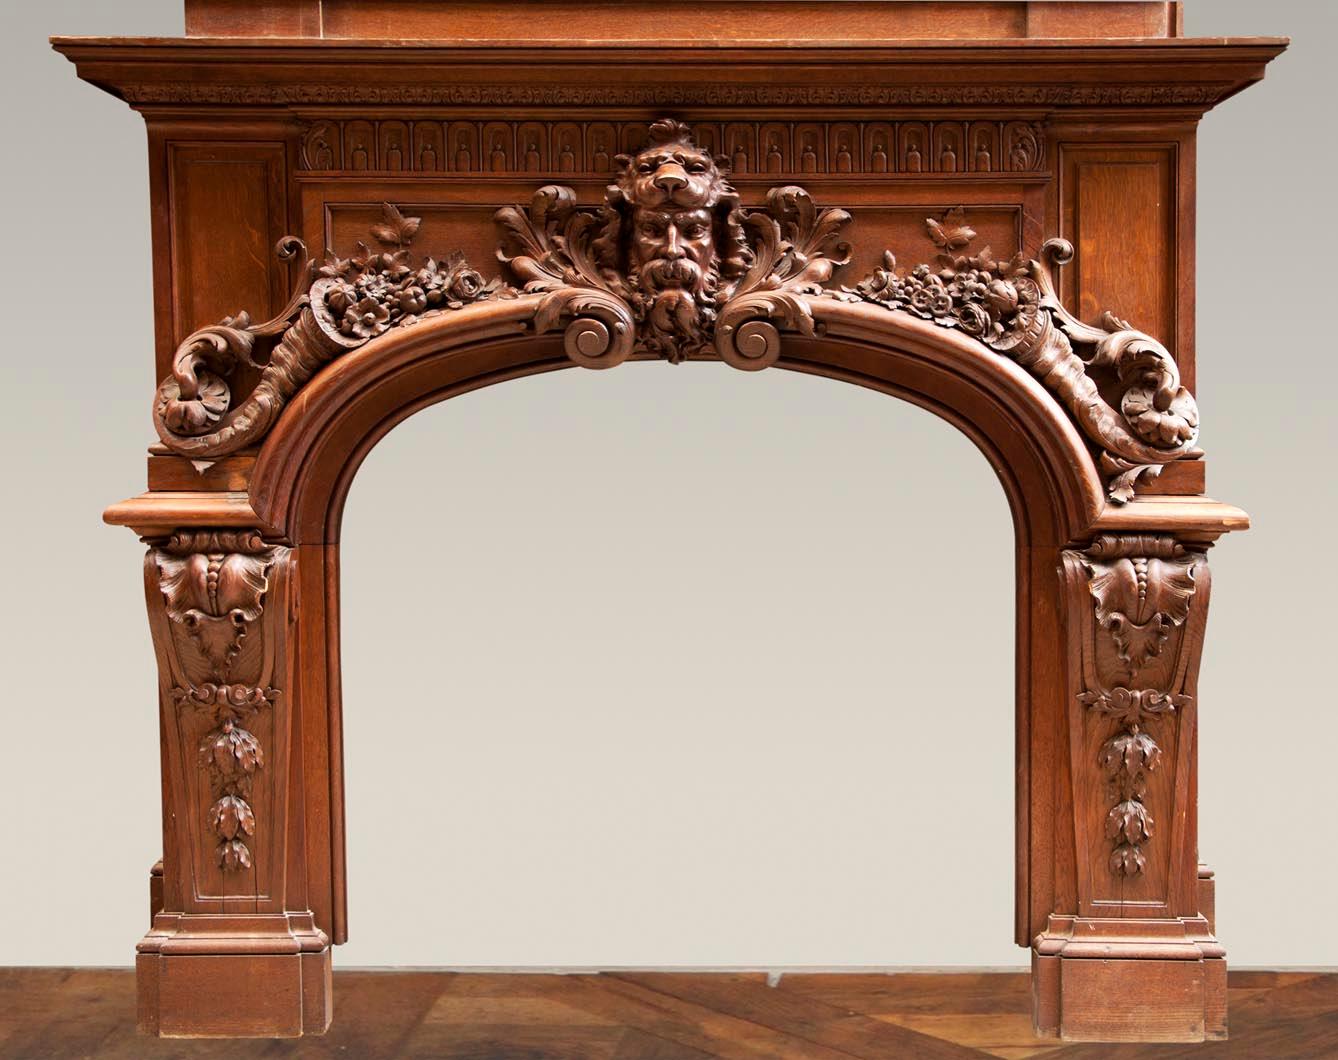 Antique oak wood fireplace inspired by the fireplace in the Hercules Salon in Versailles Palace.
This antique Regence style fireplace was made out of carved oak wood in the late 19th century. The famous fireplace sitting in the Hercules Salon in the